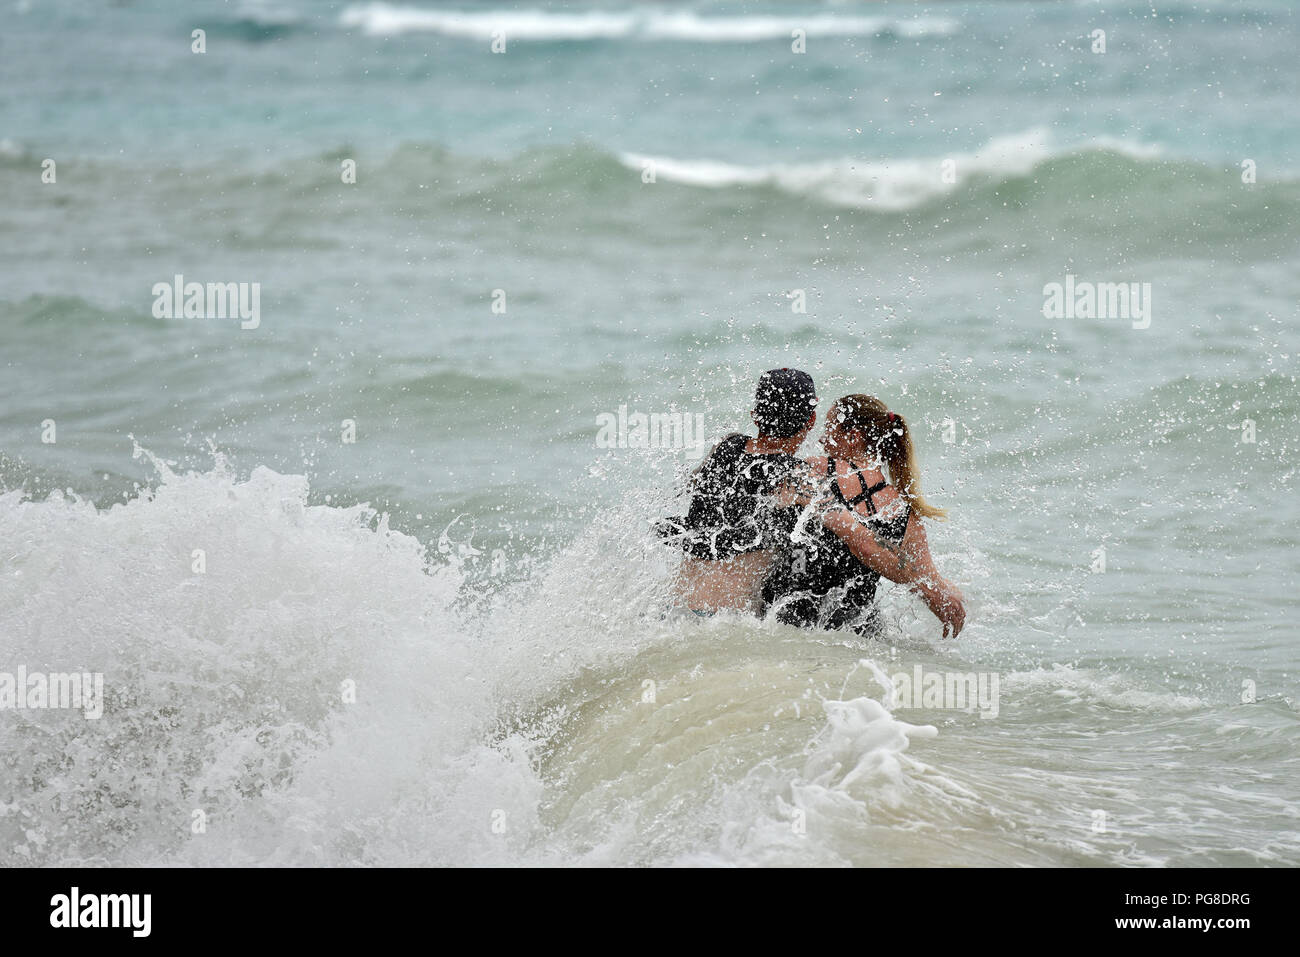 Honolulu, USA. 23rd Aug, 2018. A young couple get caught by a strong wave at Waikiki beach in Honolulu of Hawaii, the United States, Aug. 23, 2018. Hurricane Lane, predicted as the biggest weather threat to Hawaii in decades, moved perilously close to the Aloha State Thursday morning, triggering heavy rain, landslide and flooding. Credit: Sun Ruibo/Xinhua/Alamy Live News Stock Photo